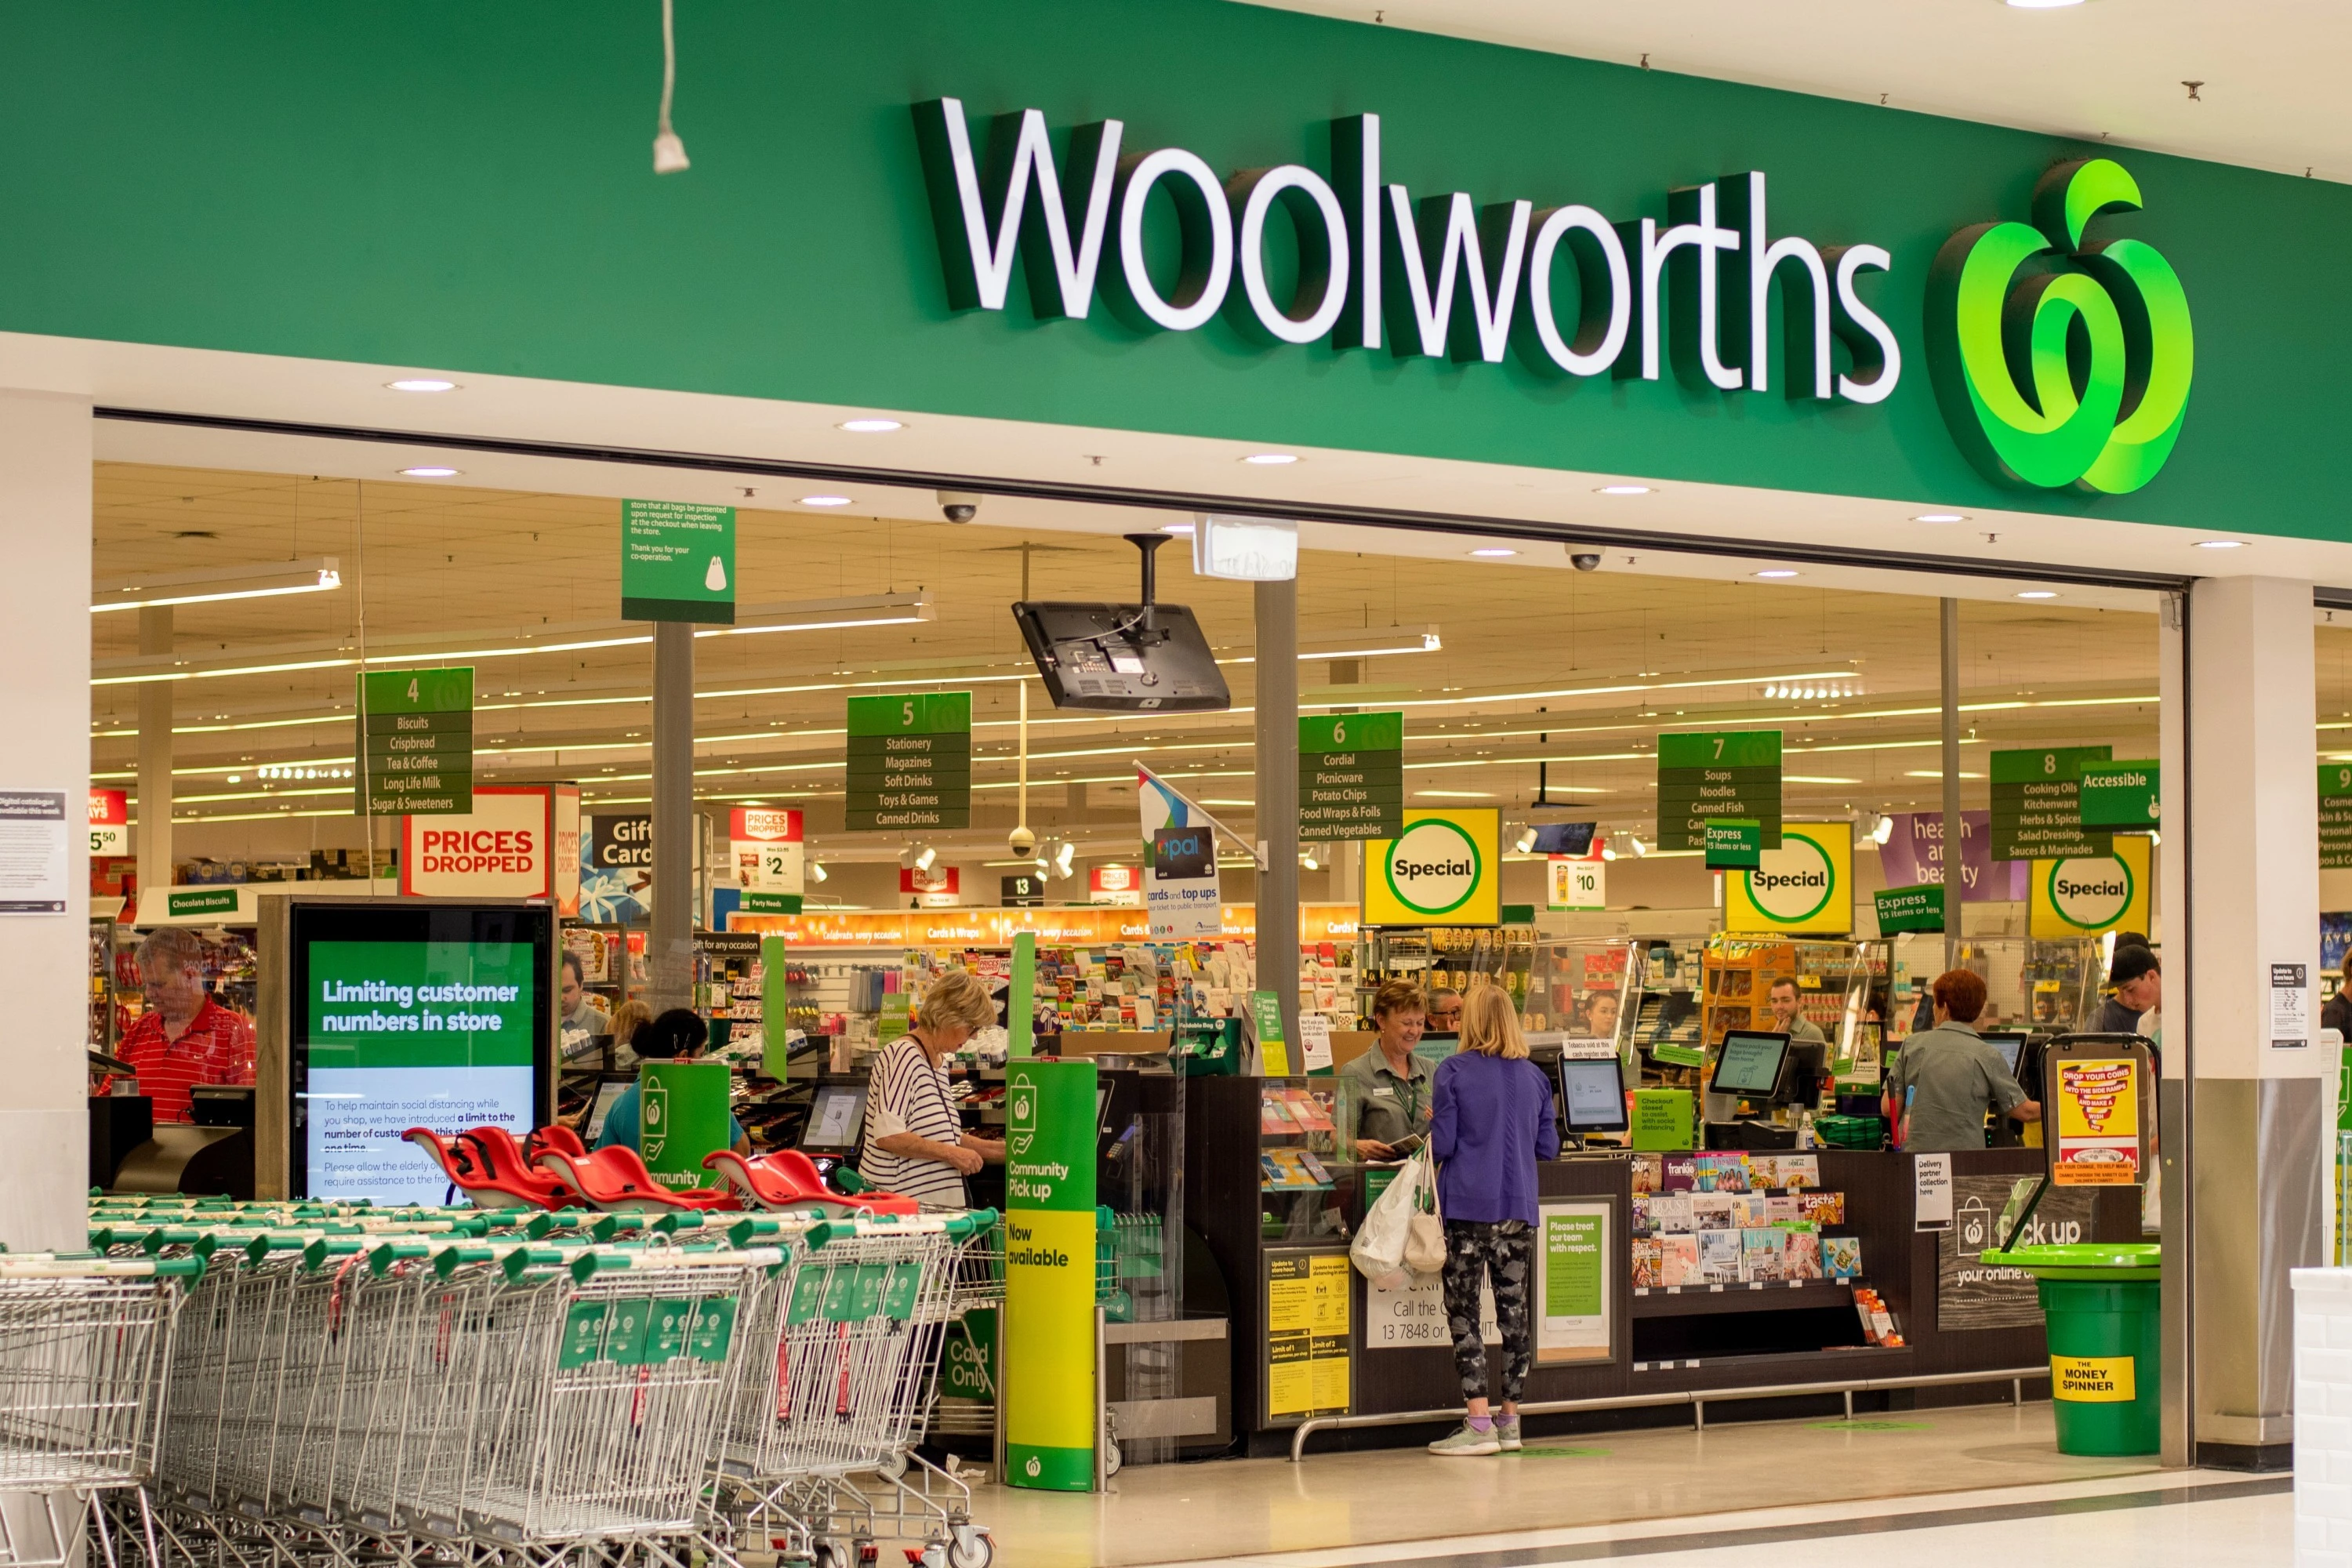 How to save money on groceries in Australia